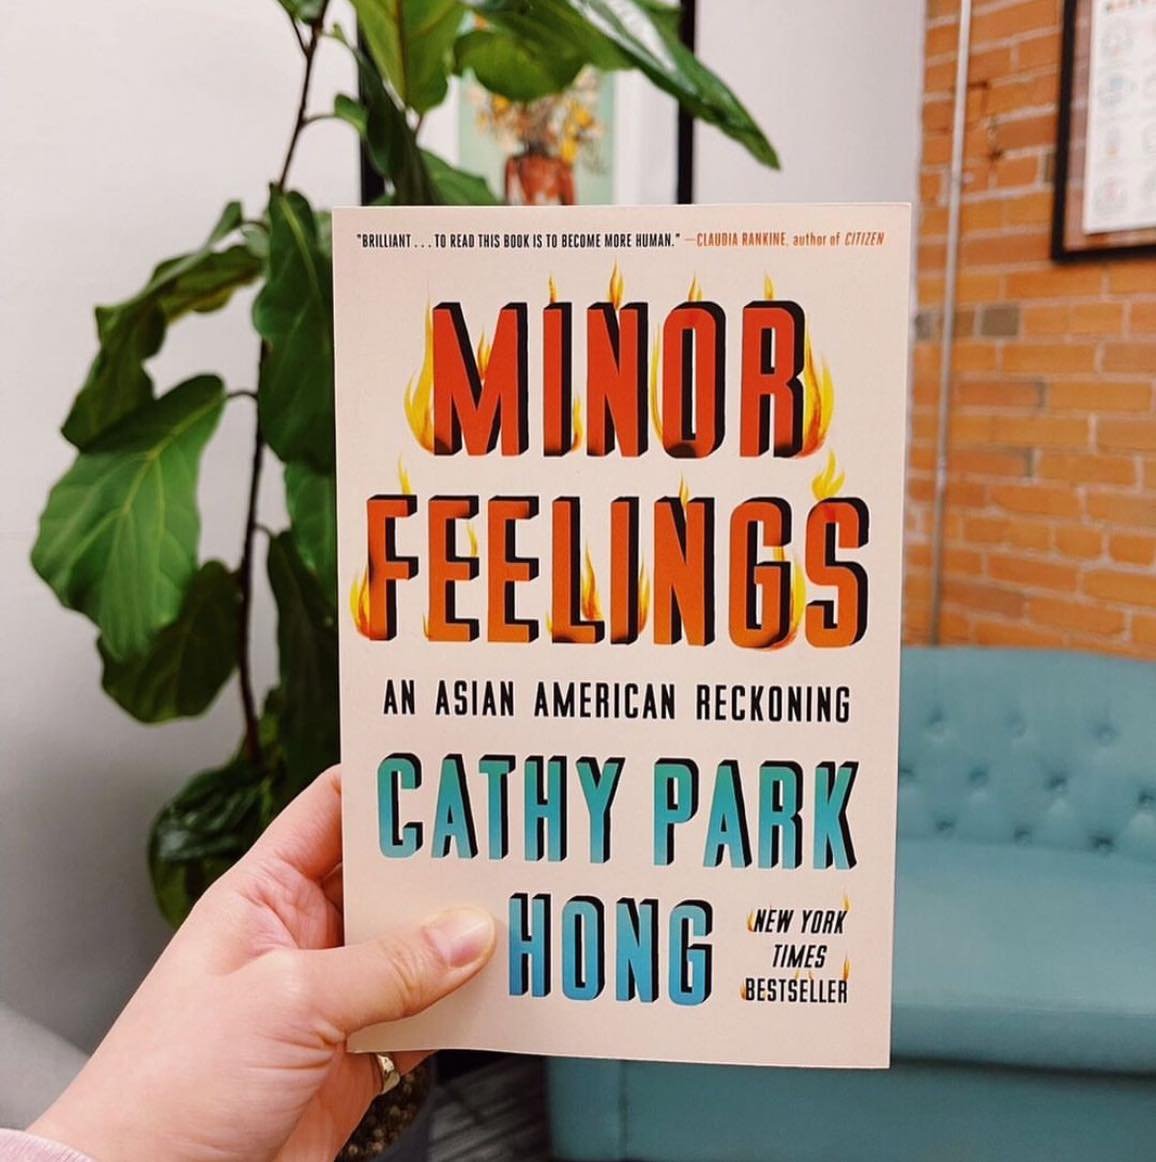 In honour of Asian Heritage Month, we&rsquo;ll be sharing some of our favourite mental health books &amp; resources by Asian authors throughout May.
.
First up is Minor Feelings: An Asian American Reckoning by Cathy Park Hong.
.
Fave quote: &ldquo;My